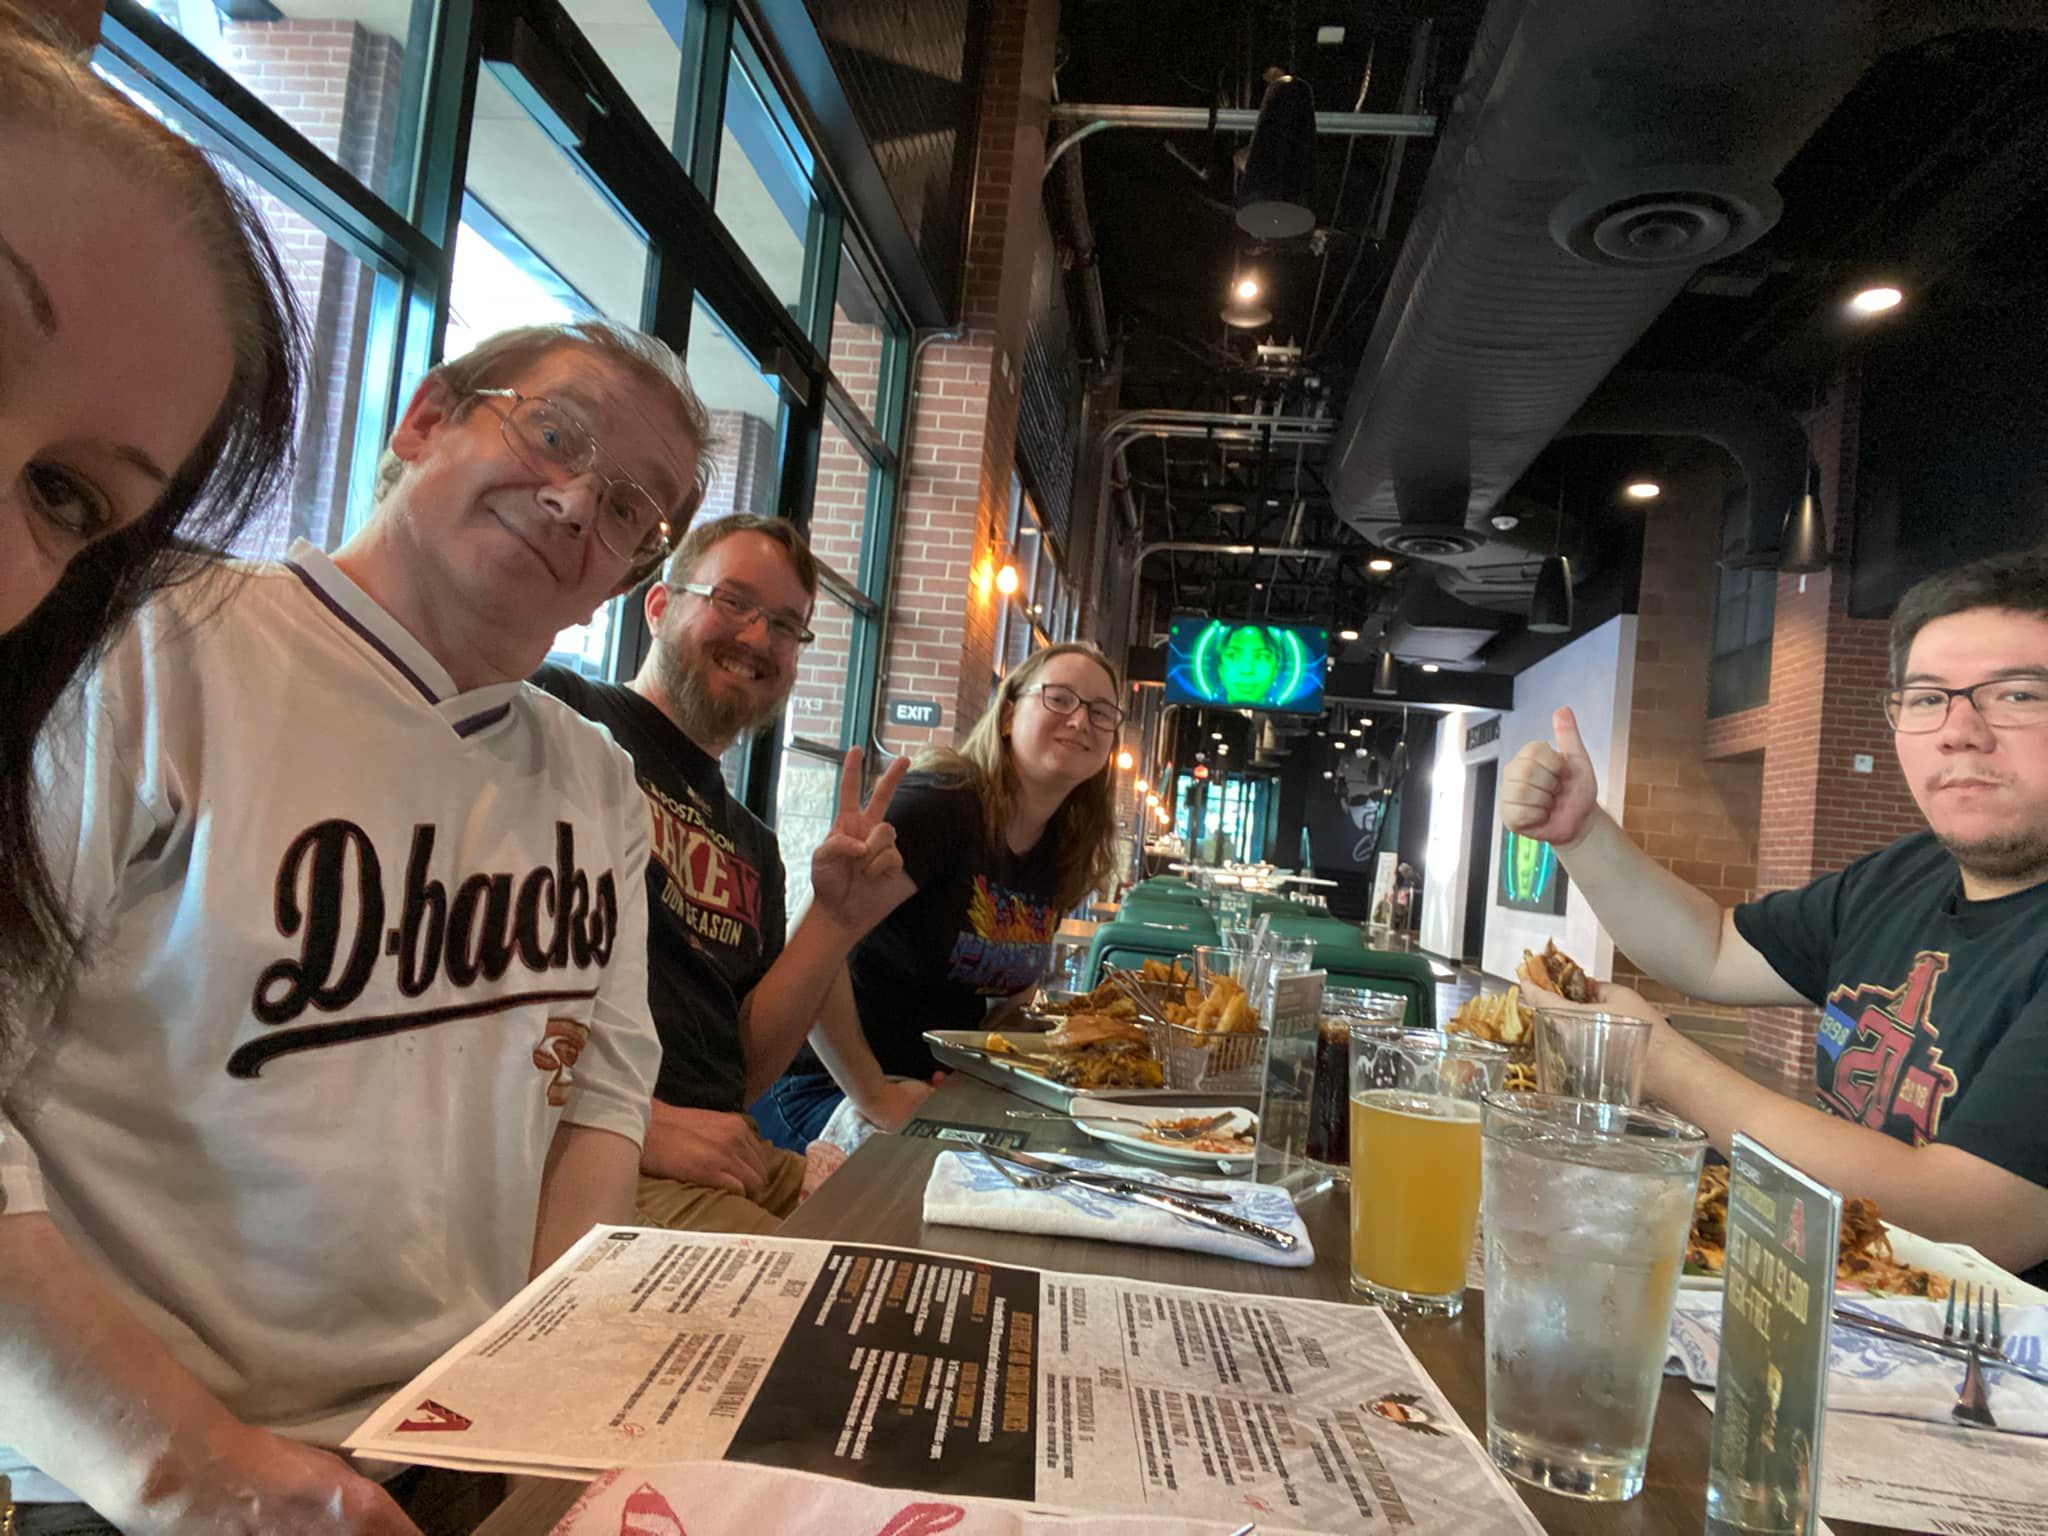 a group, selfie style photo of (from right to left) Mrs. Snakepit, Jim, myself, my wife, and Michael McDerrmott in the Caesar’s Sportsbook at Chase Field